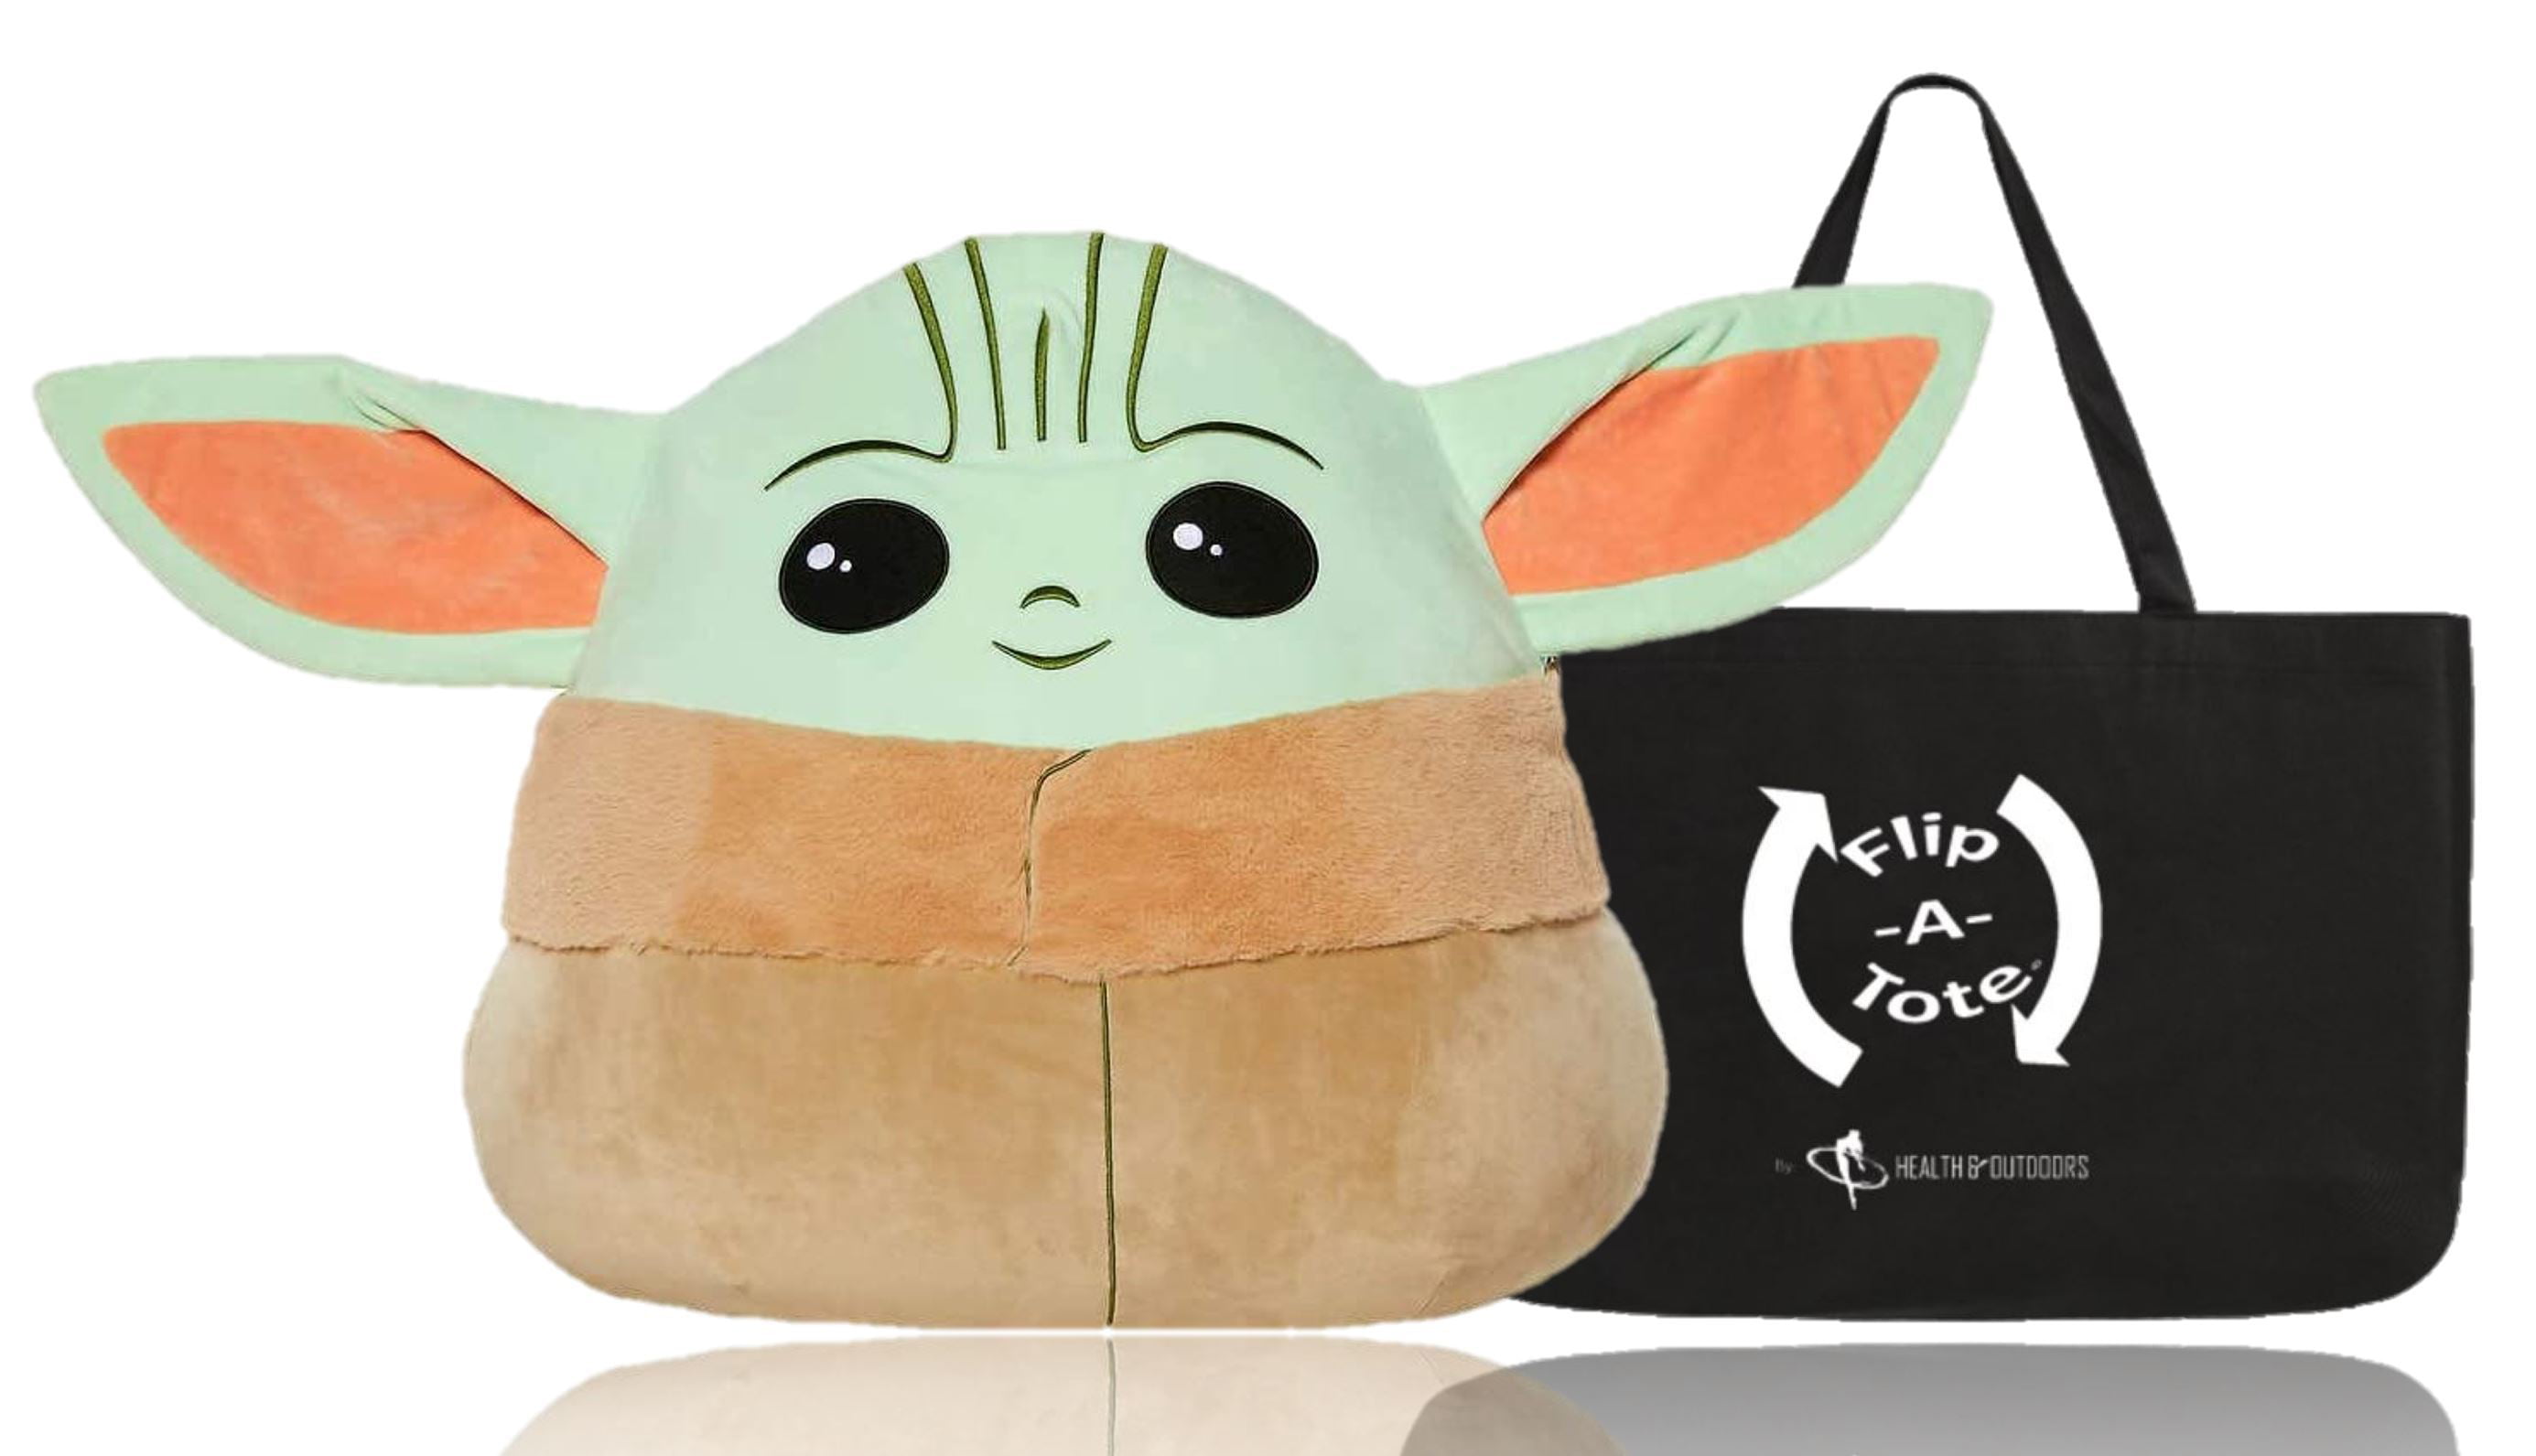 Squishmallow Kellytoy 20 Inch The Baby Yoda Stuffed Toy for sale online 